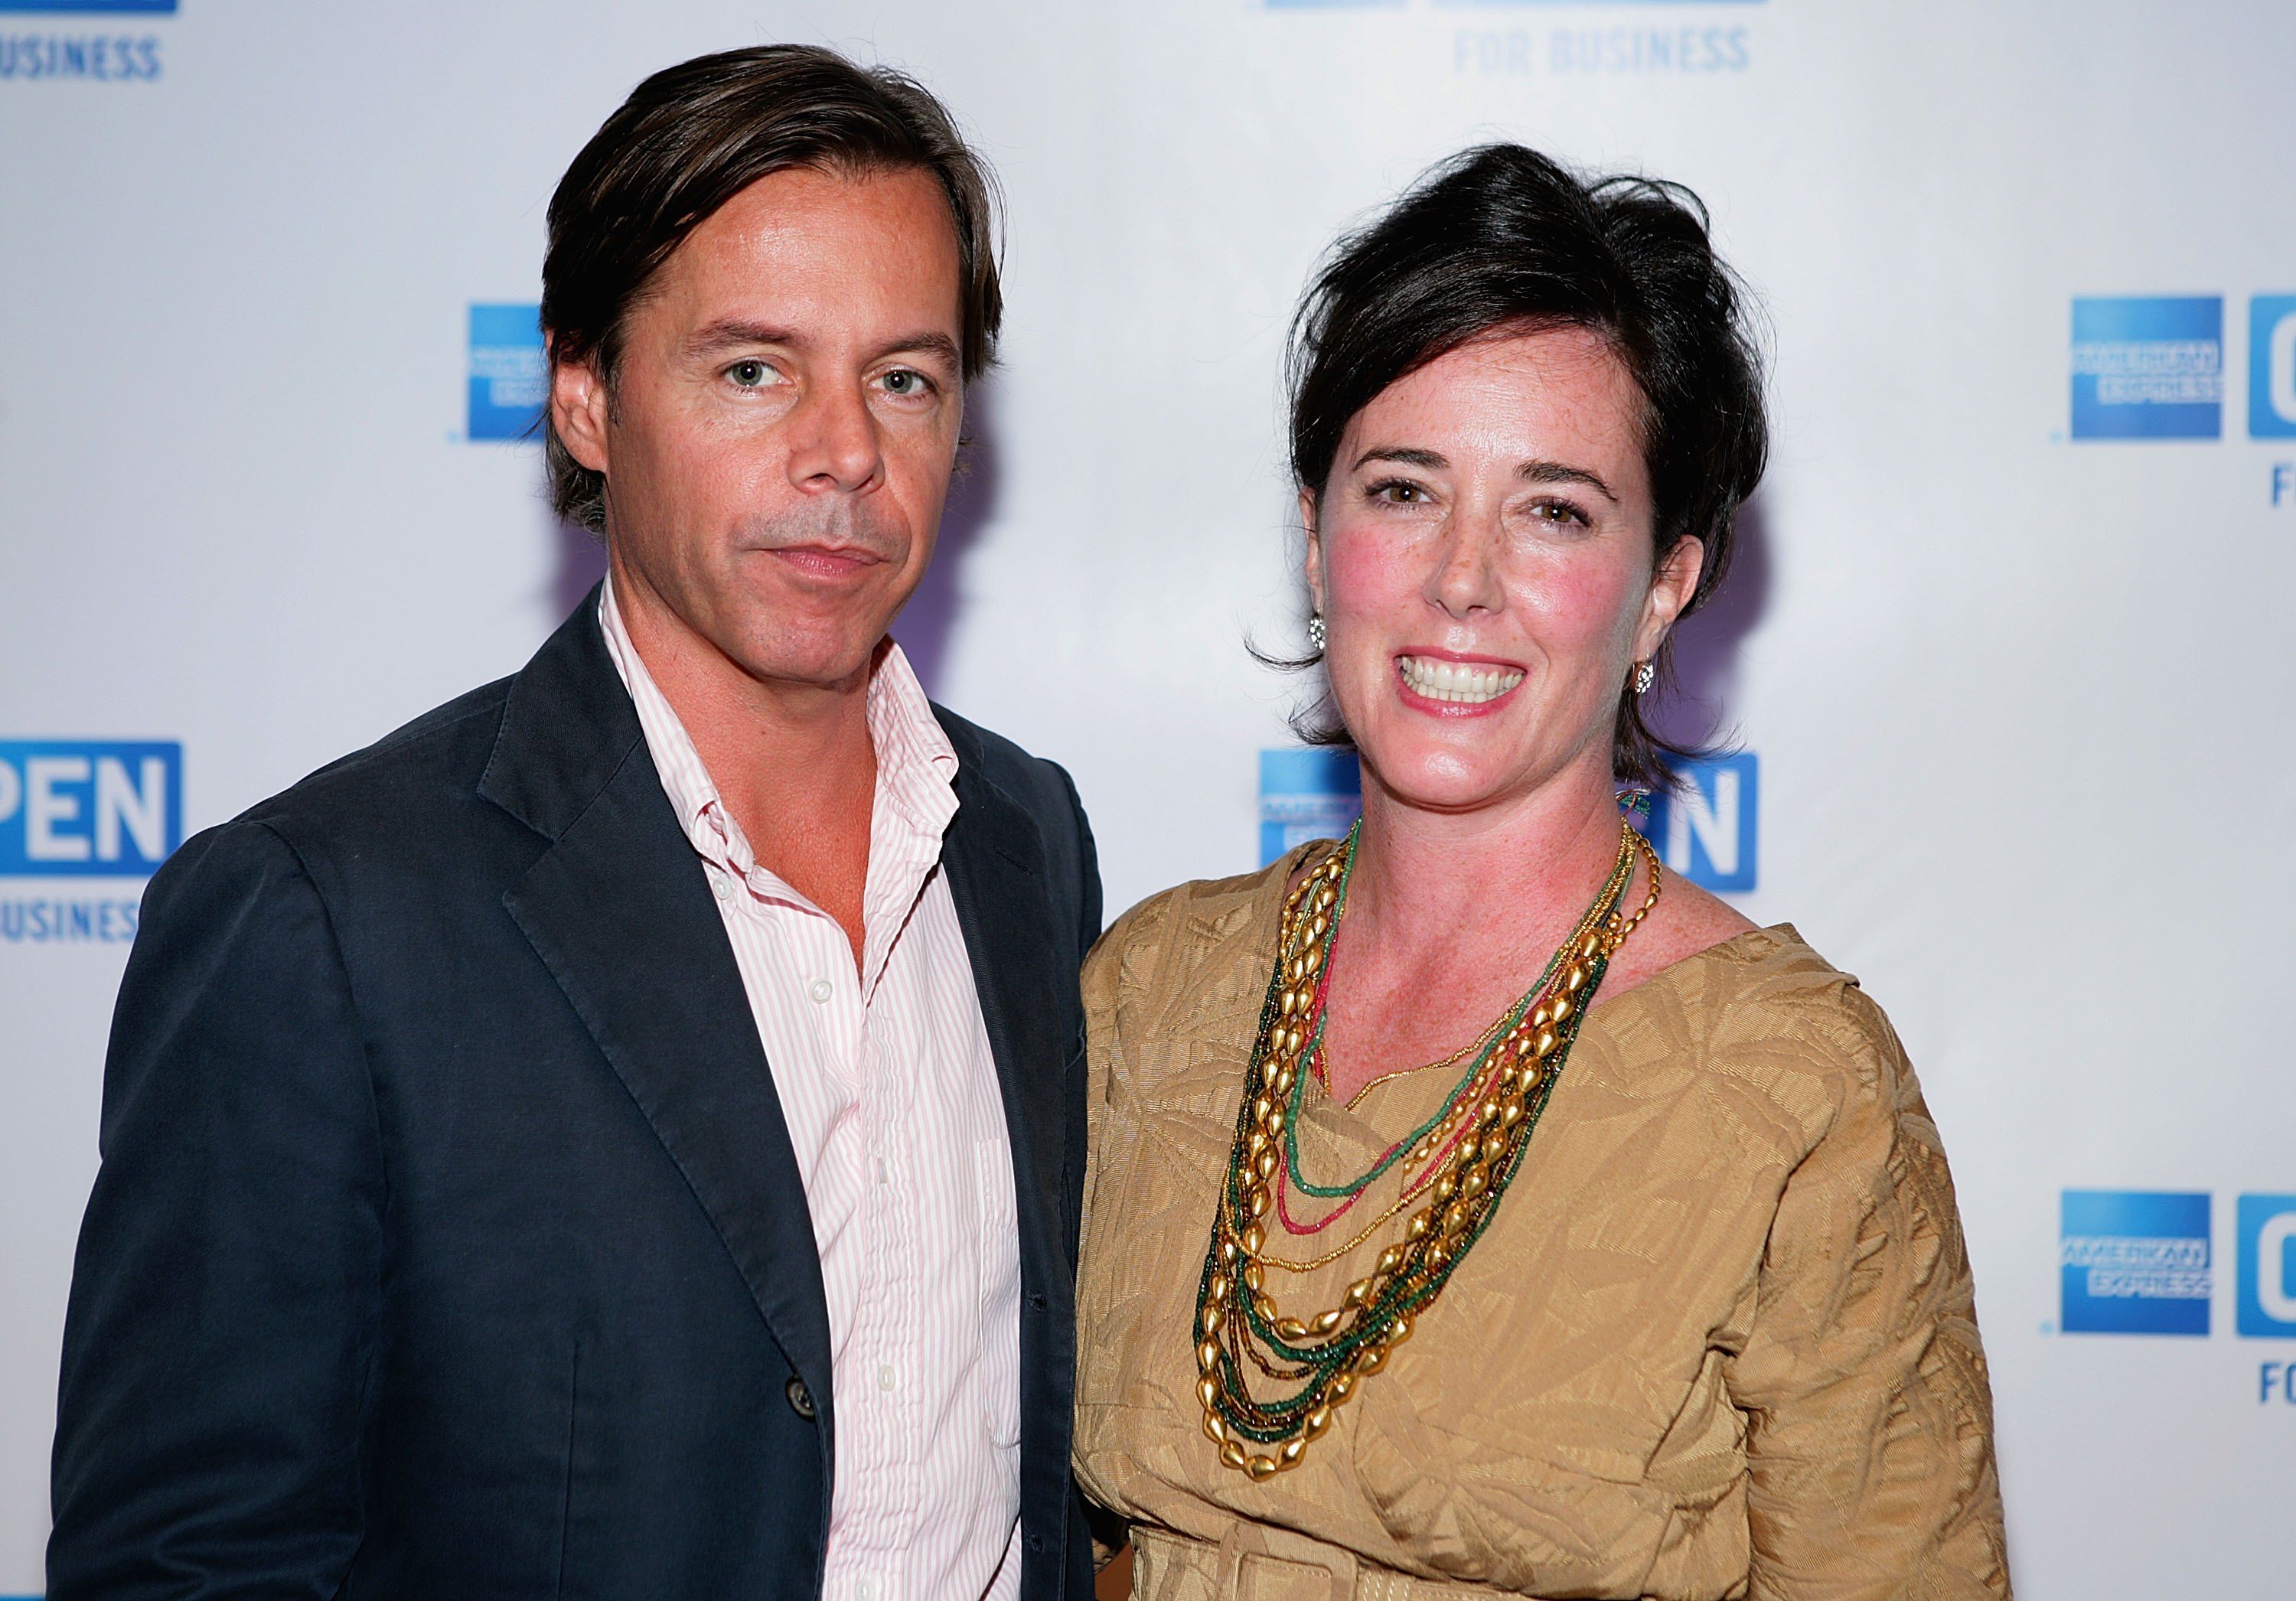 Kate Spade's husband Andy was 